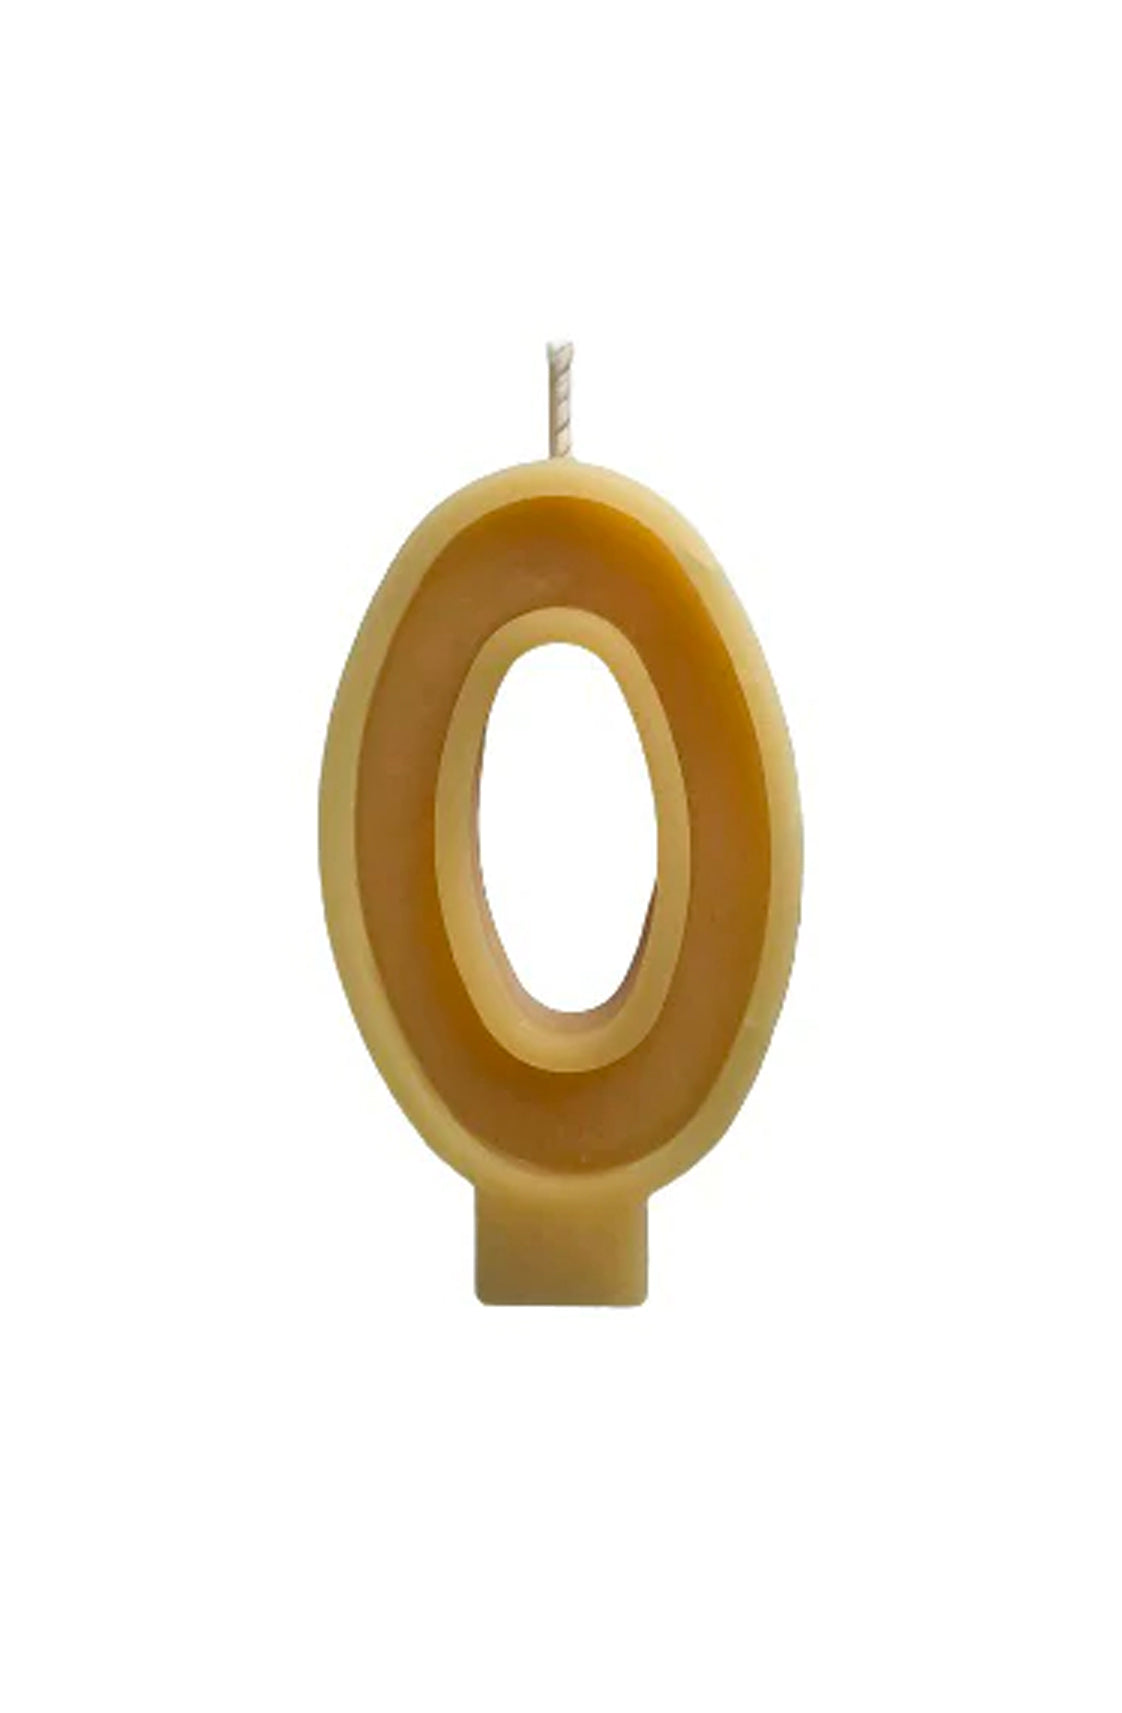 Australian Beeswax Number Candle, 0